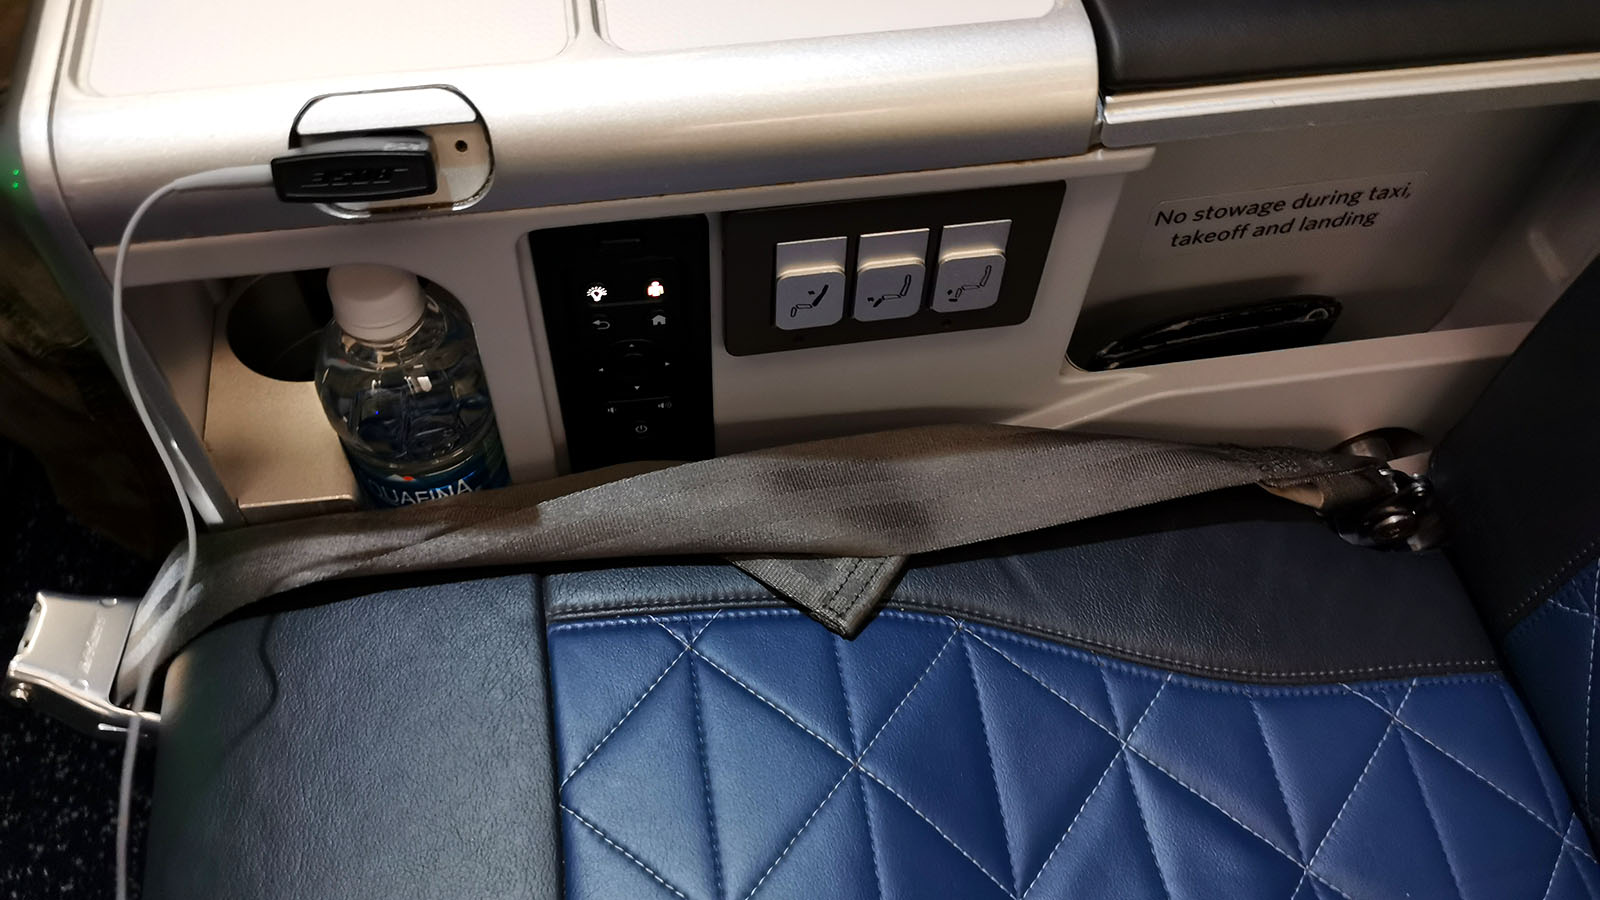 Seat controls and water bottle in Delta A330-900neo Comfort+